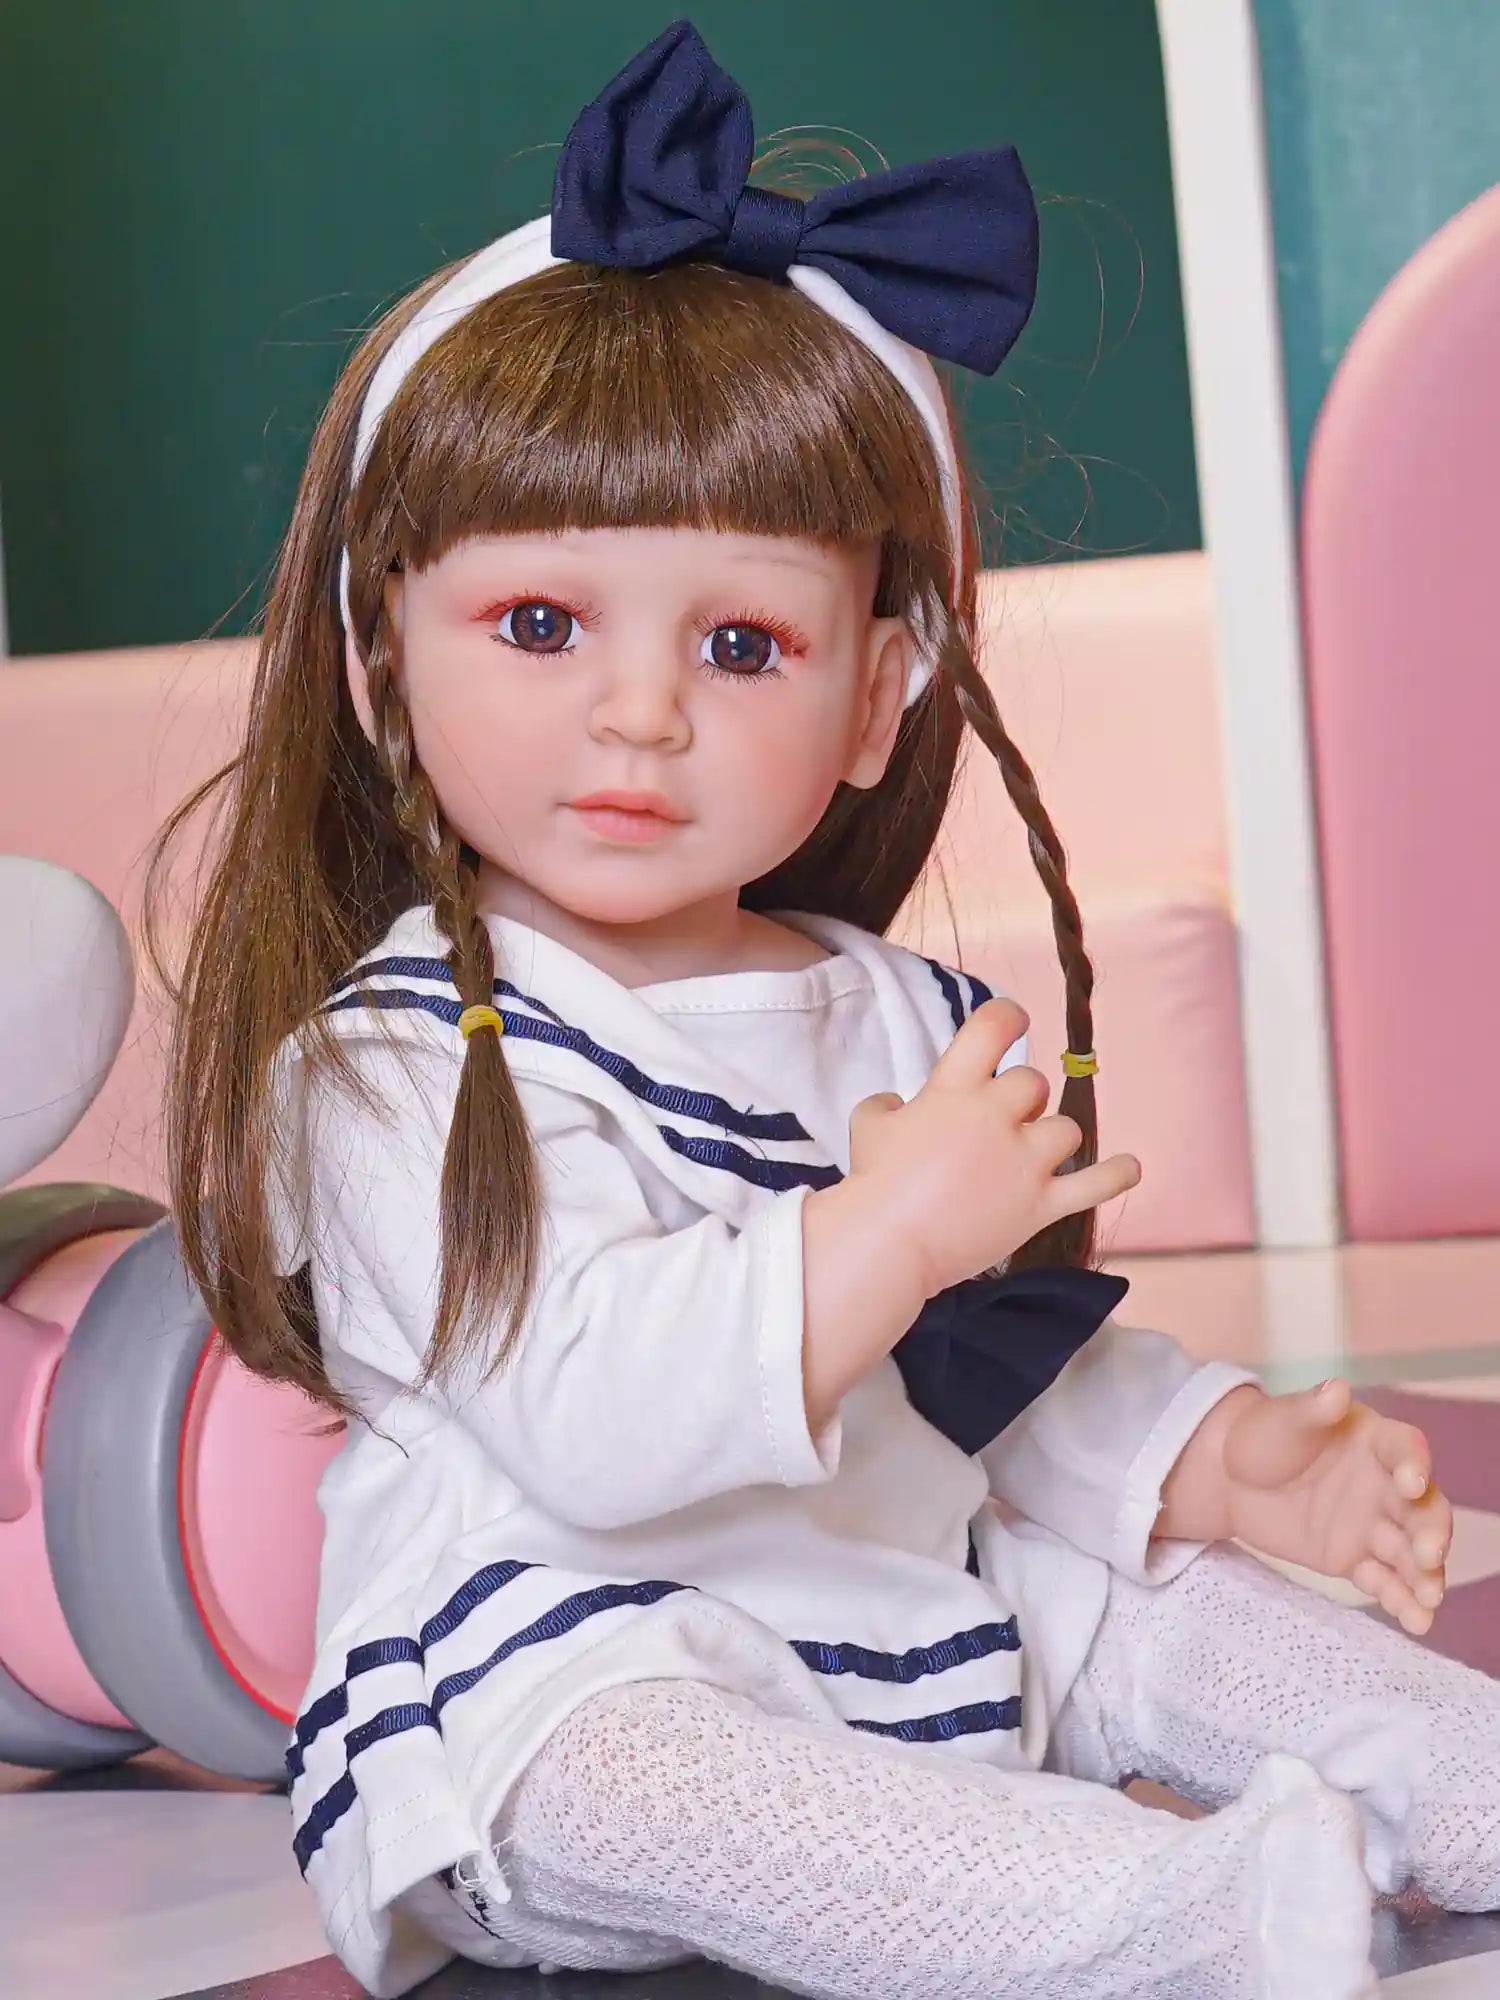 A doll designed to resemble a young child, complete with a lavender sweater and a fabric hair accessory, seated comfortably.